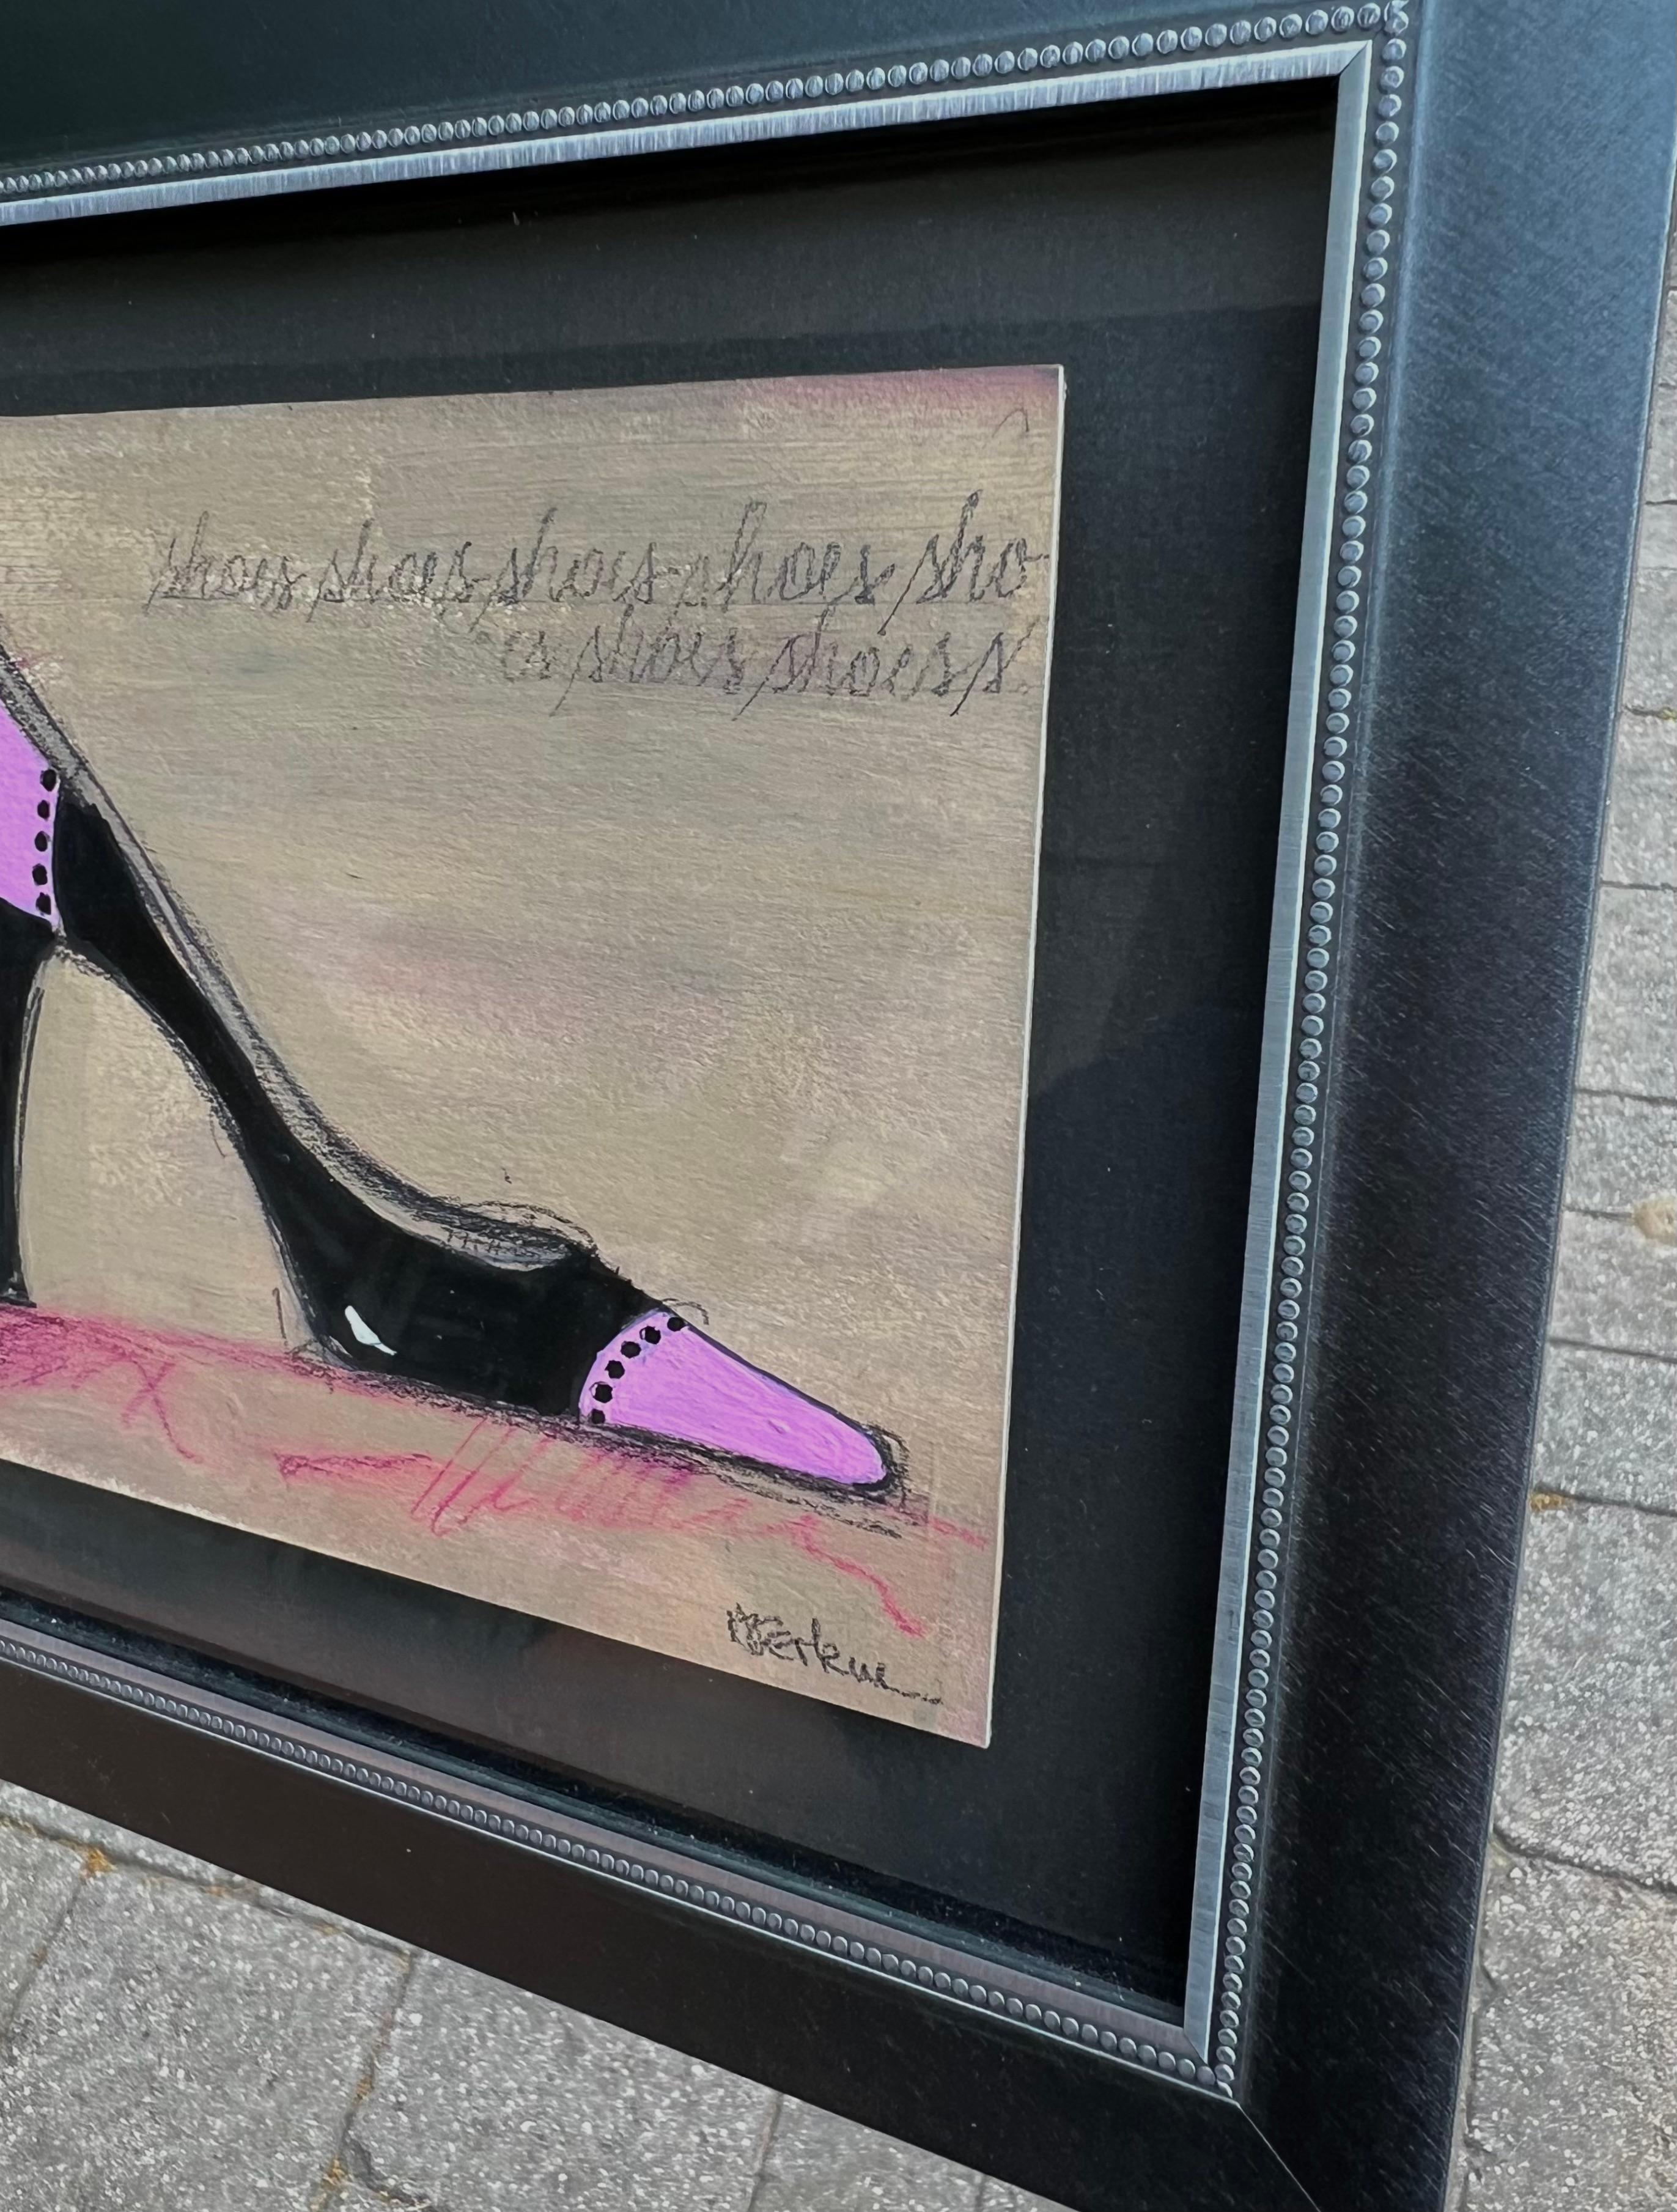 I Love Shoes -  (8.25”x9.25”, Shoe Series, Pink And Black Shoe, Framed) For Sale 4